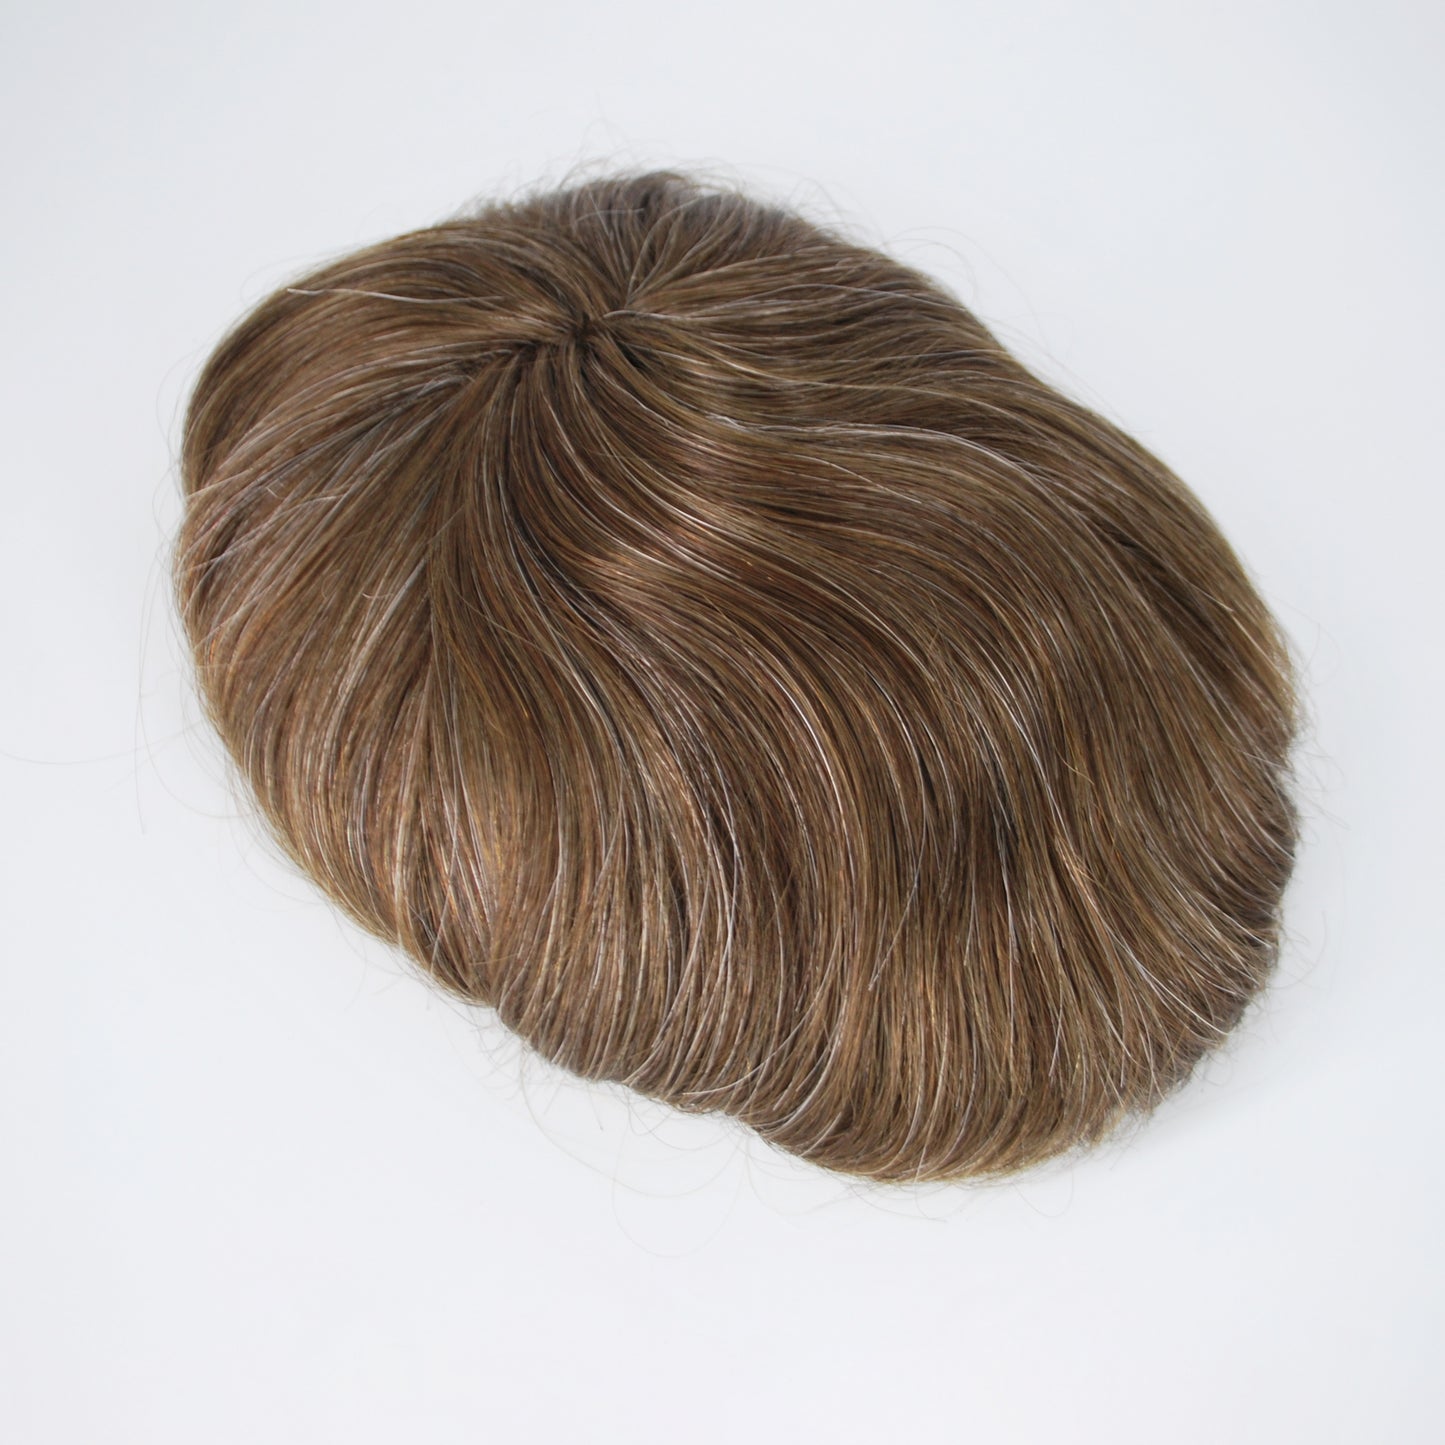 Clearance medium brown mixed 15% grey hair system for men french lace with PU around toupee wig